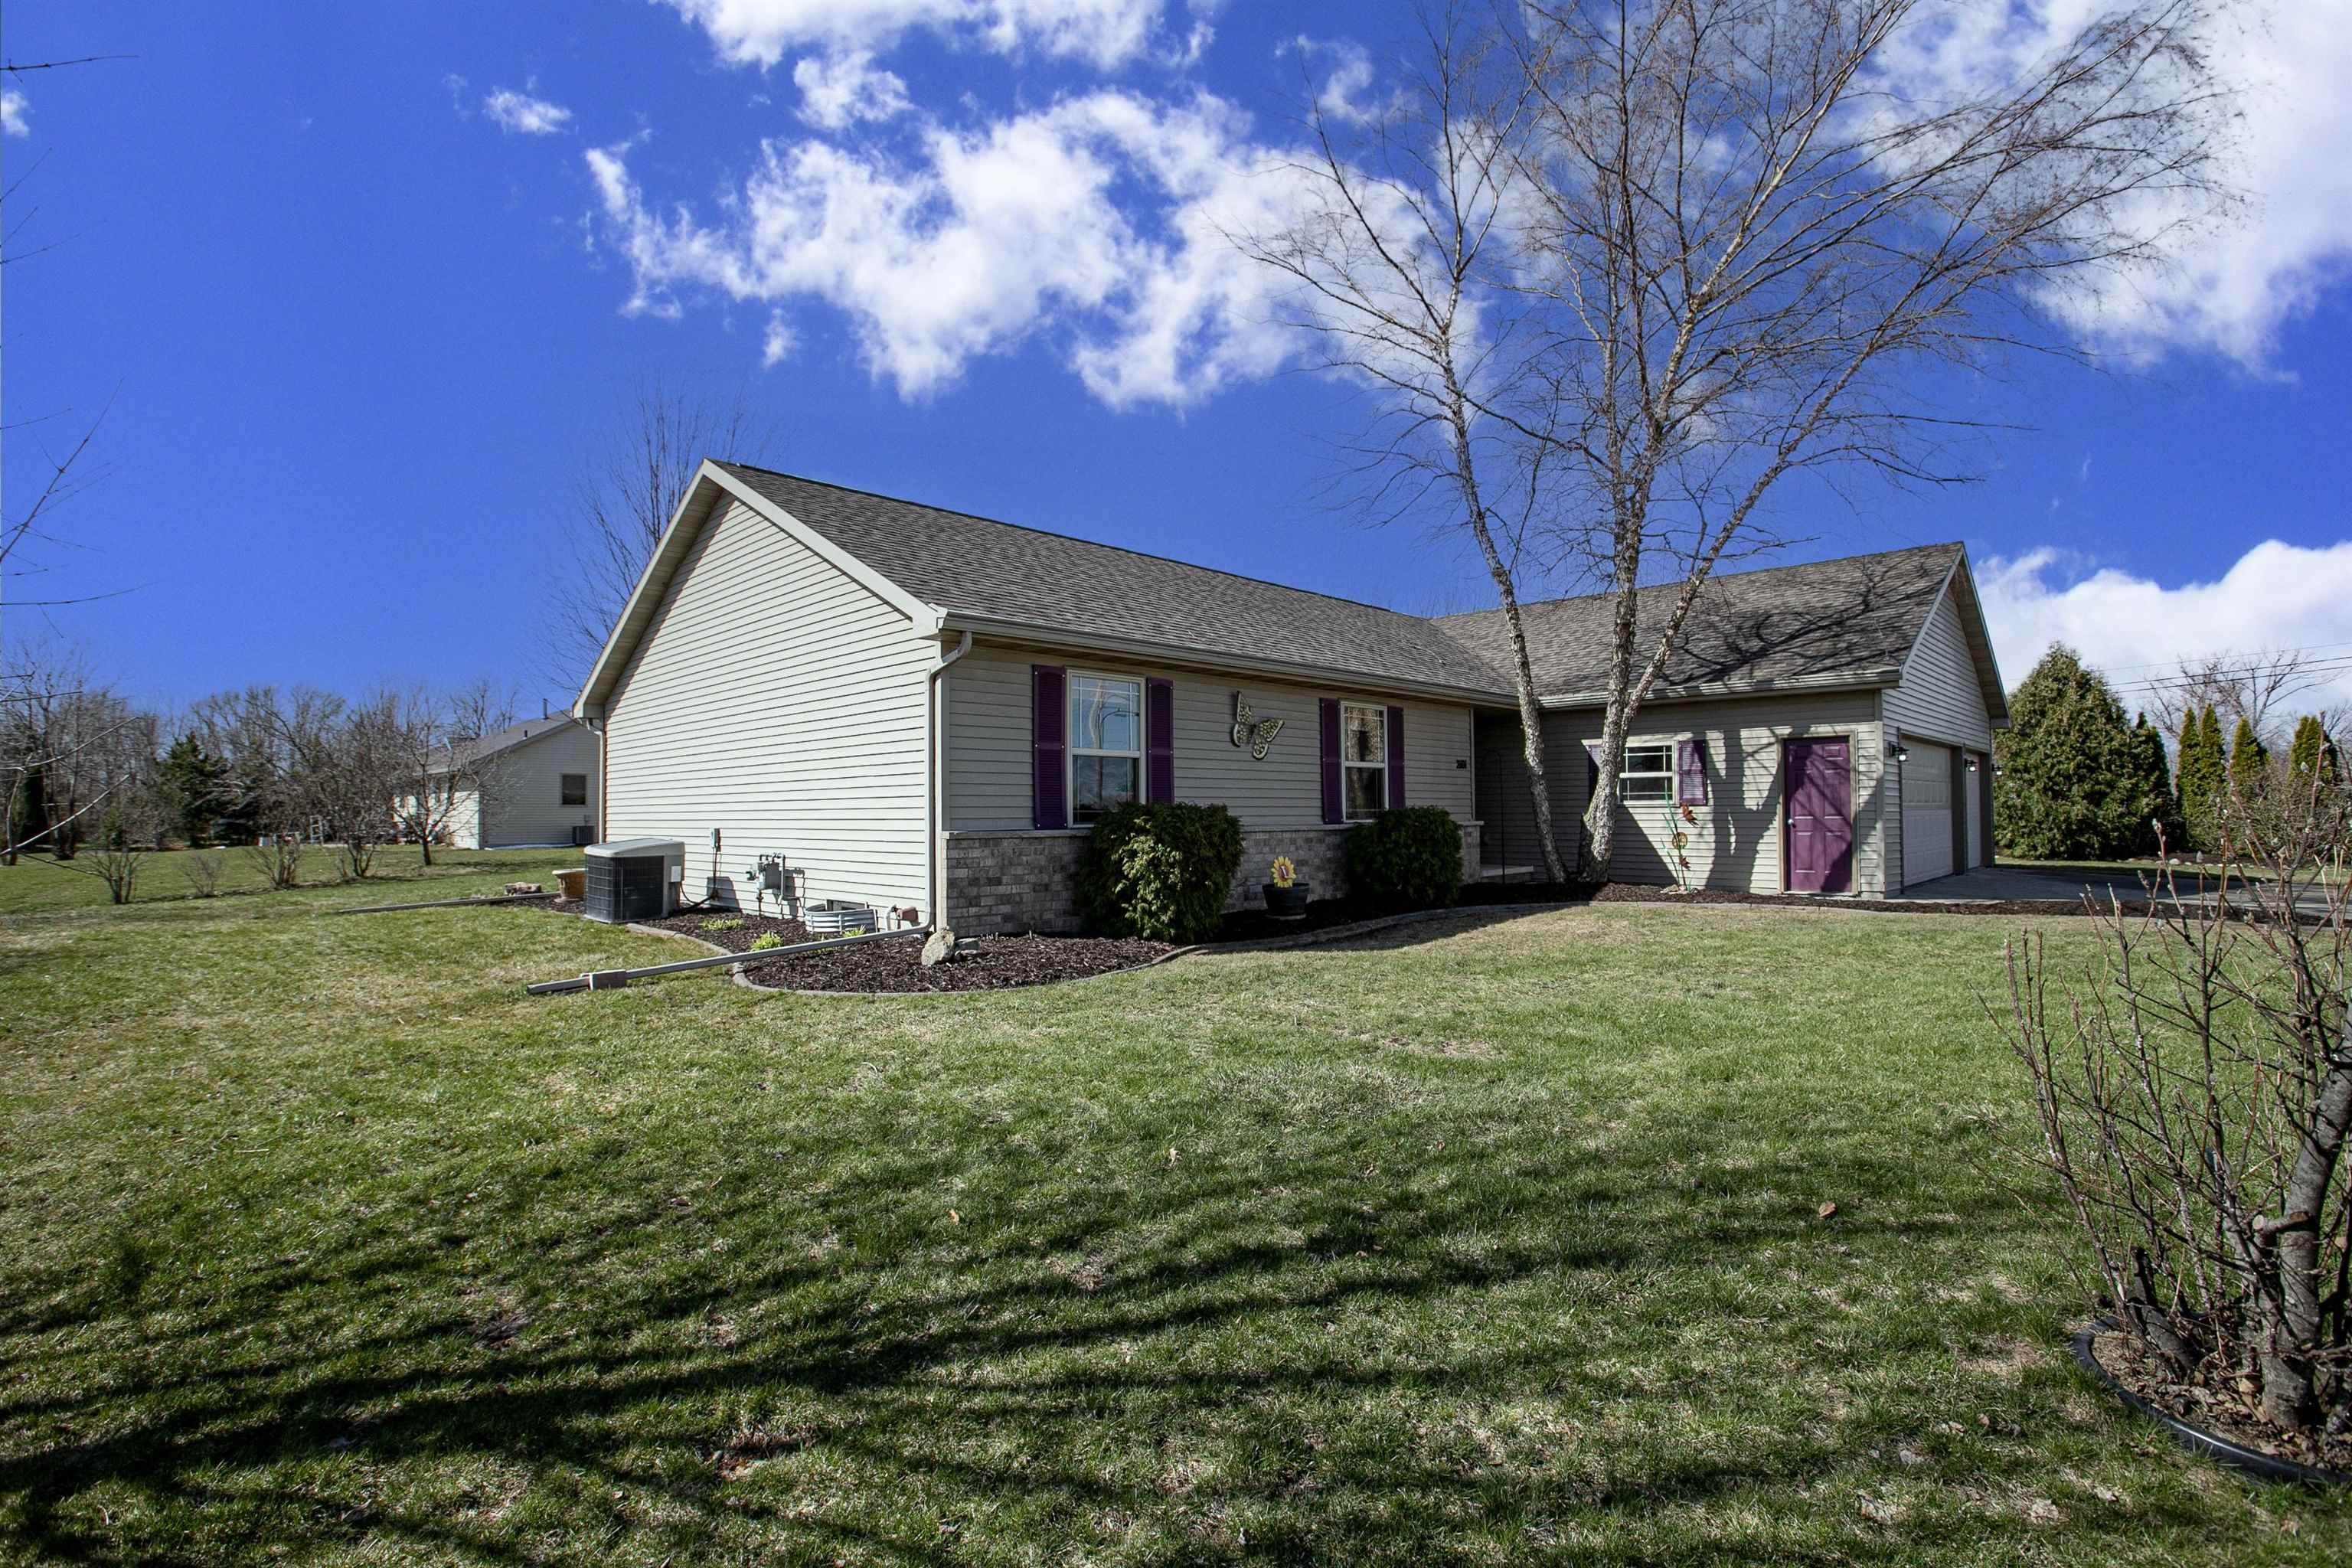 2. 2101 Olde Country Circle